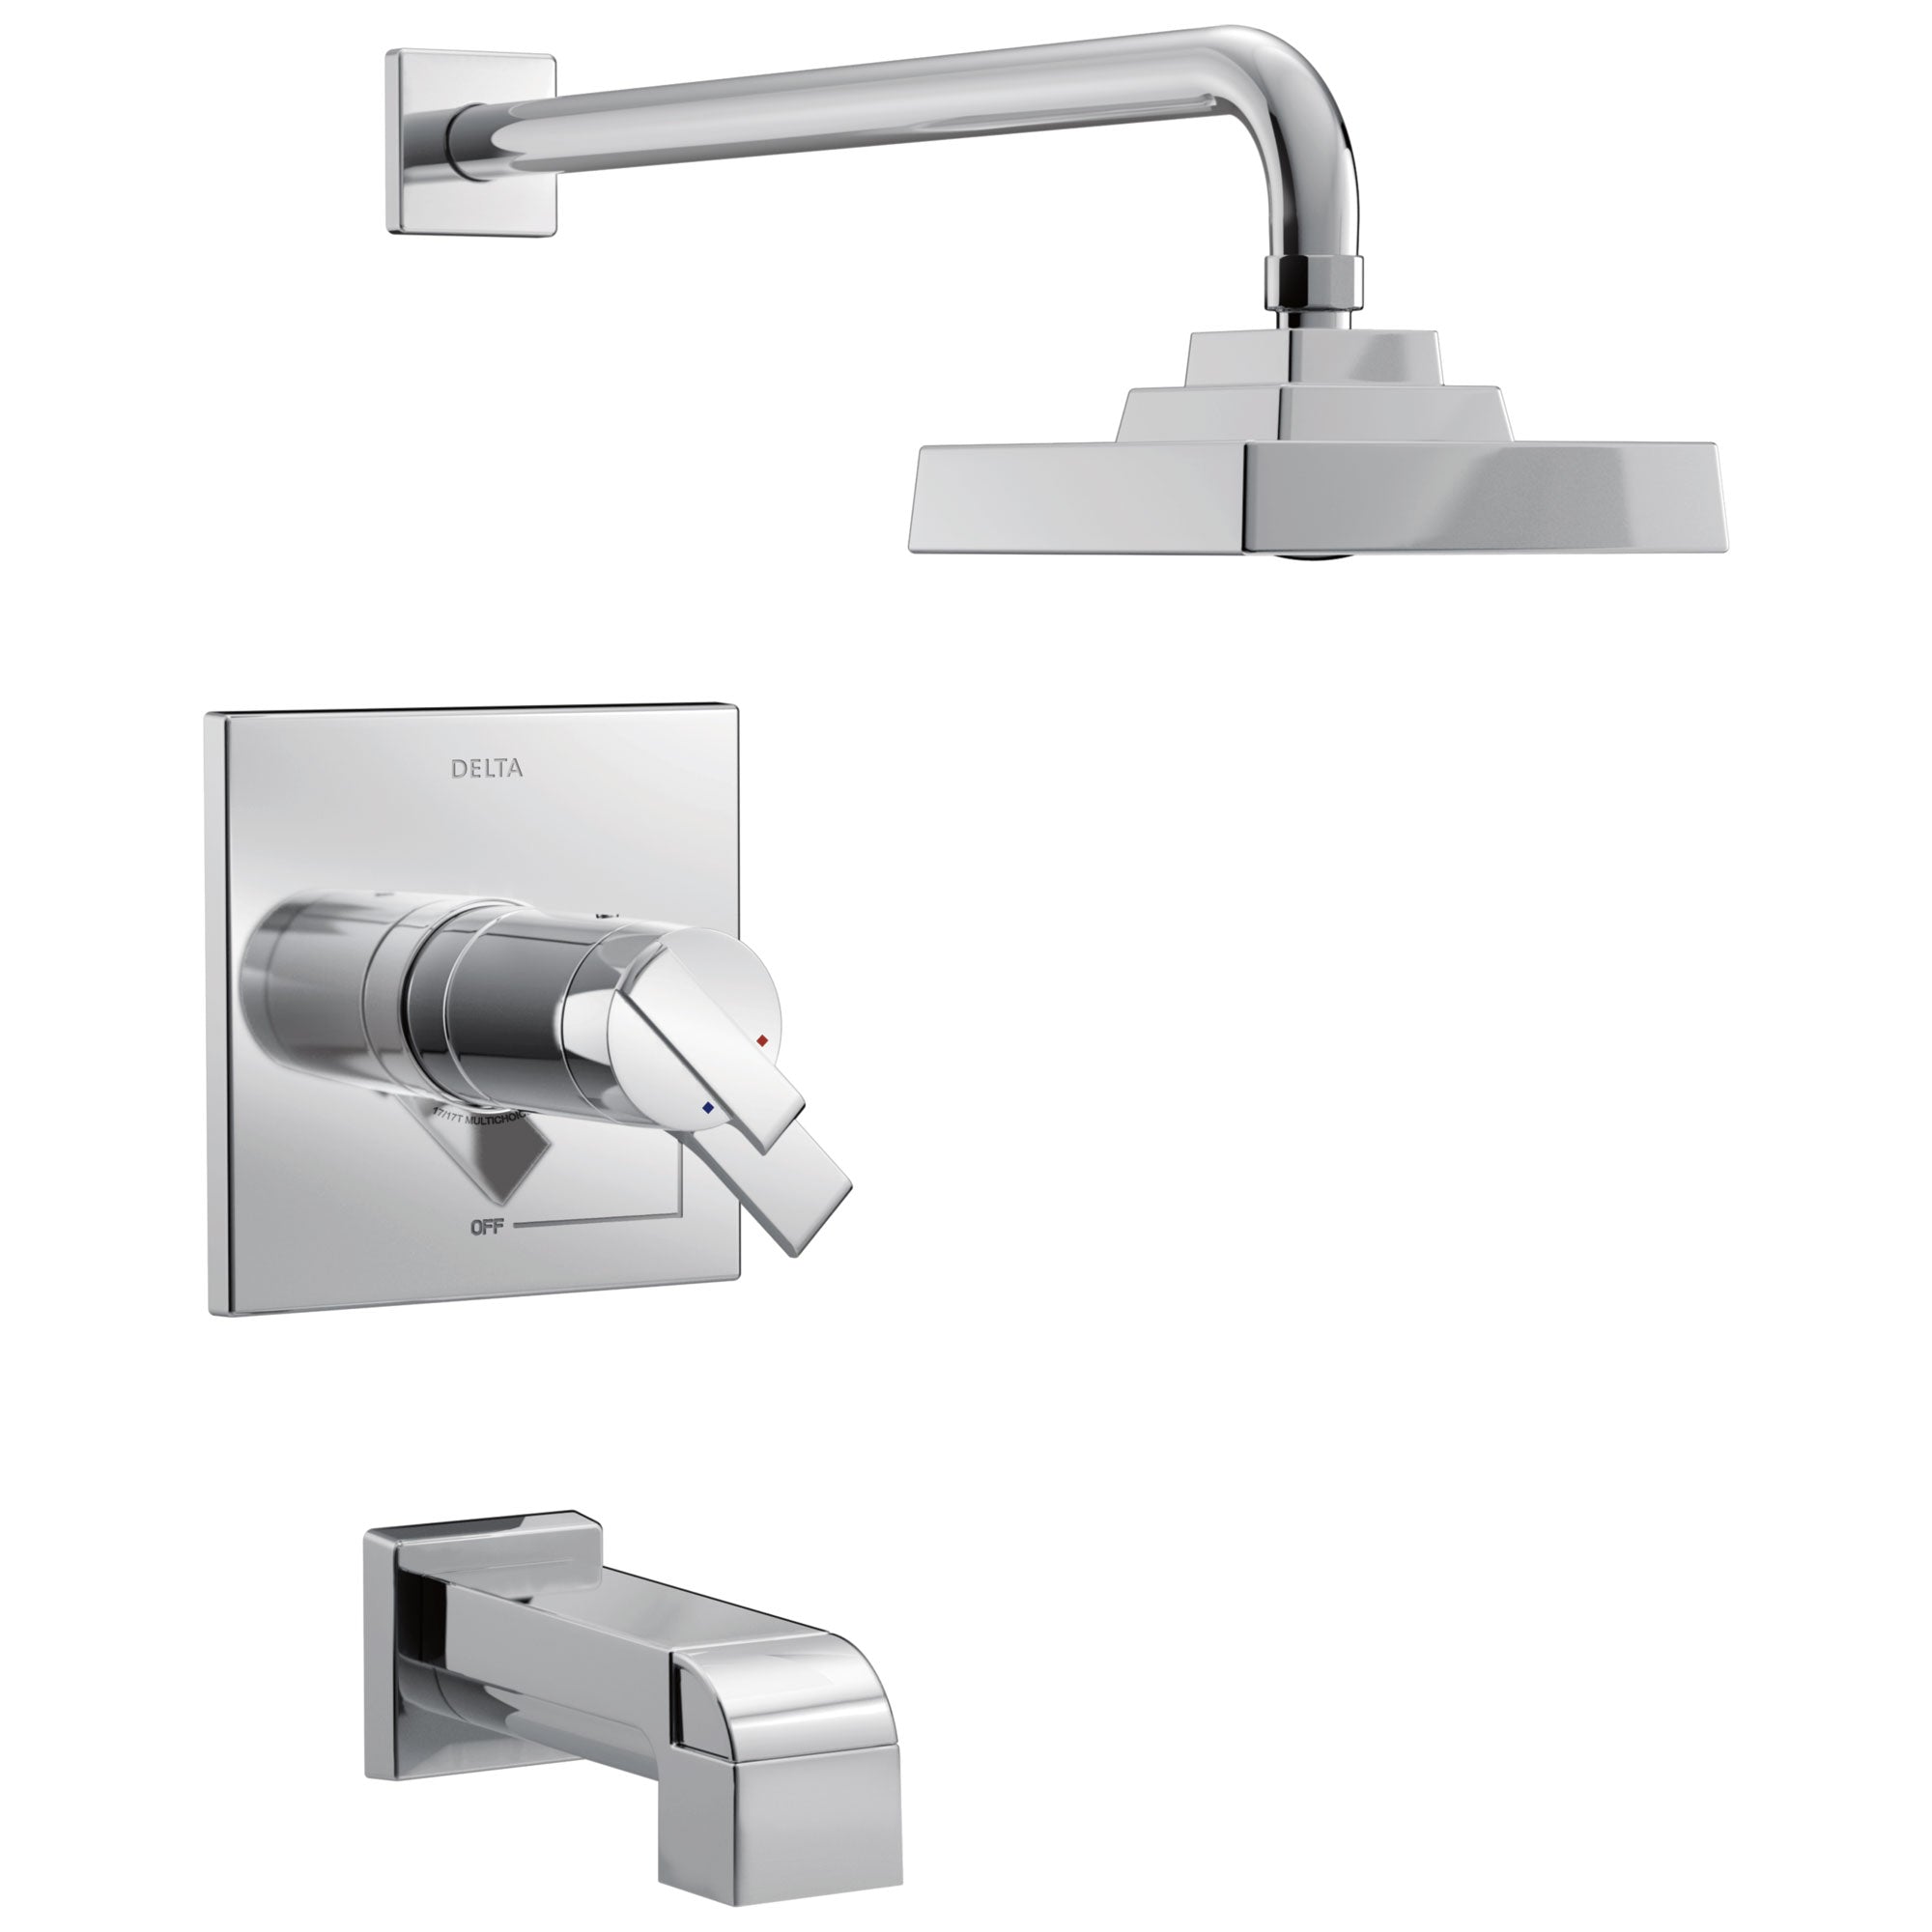 Delta Ara Collection Chrome Modern Thermostatic TempAssure 17T Series Tub and Shower Combination Faucet Trim Kit (Requires Rough-in Valve) DT17T467